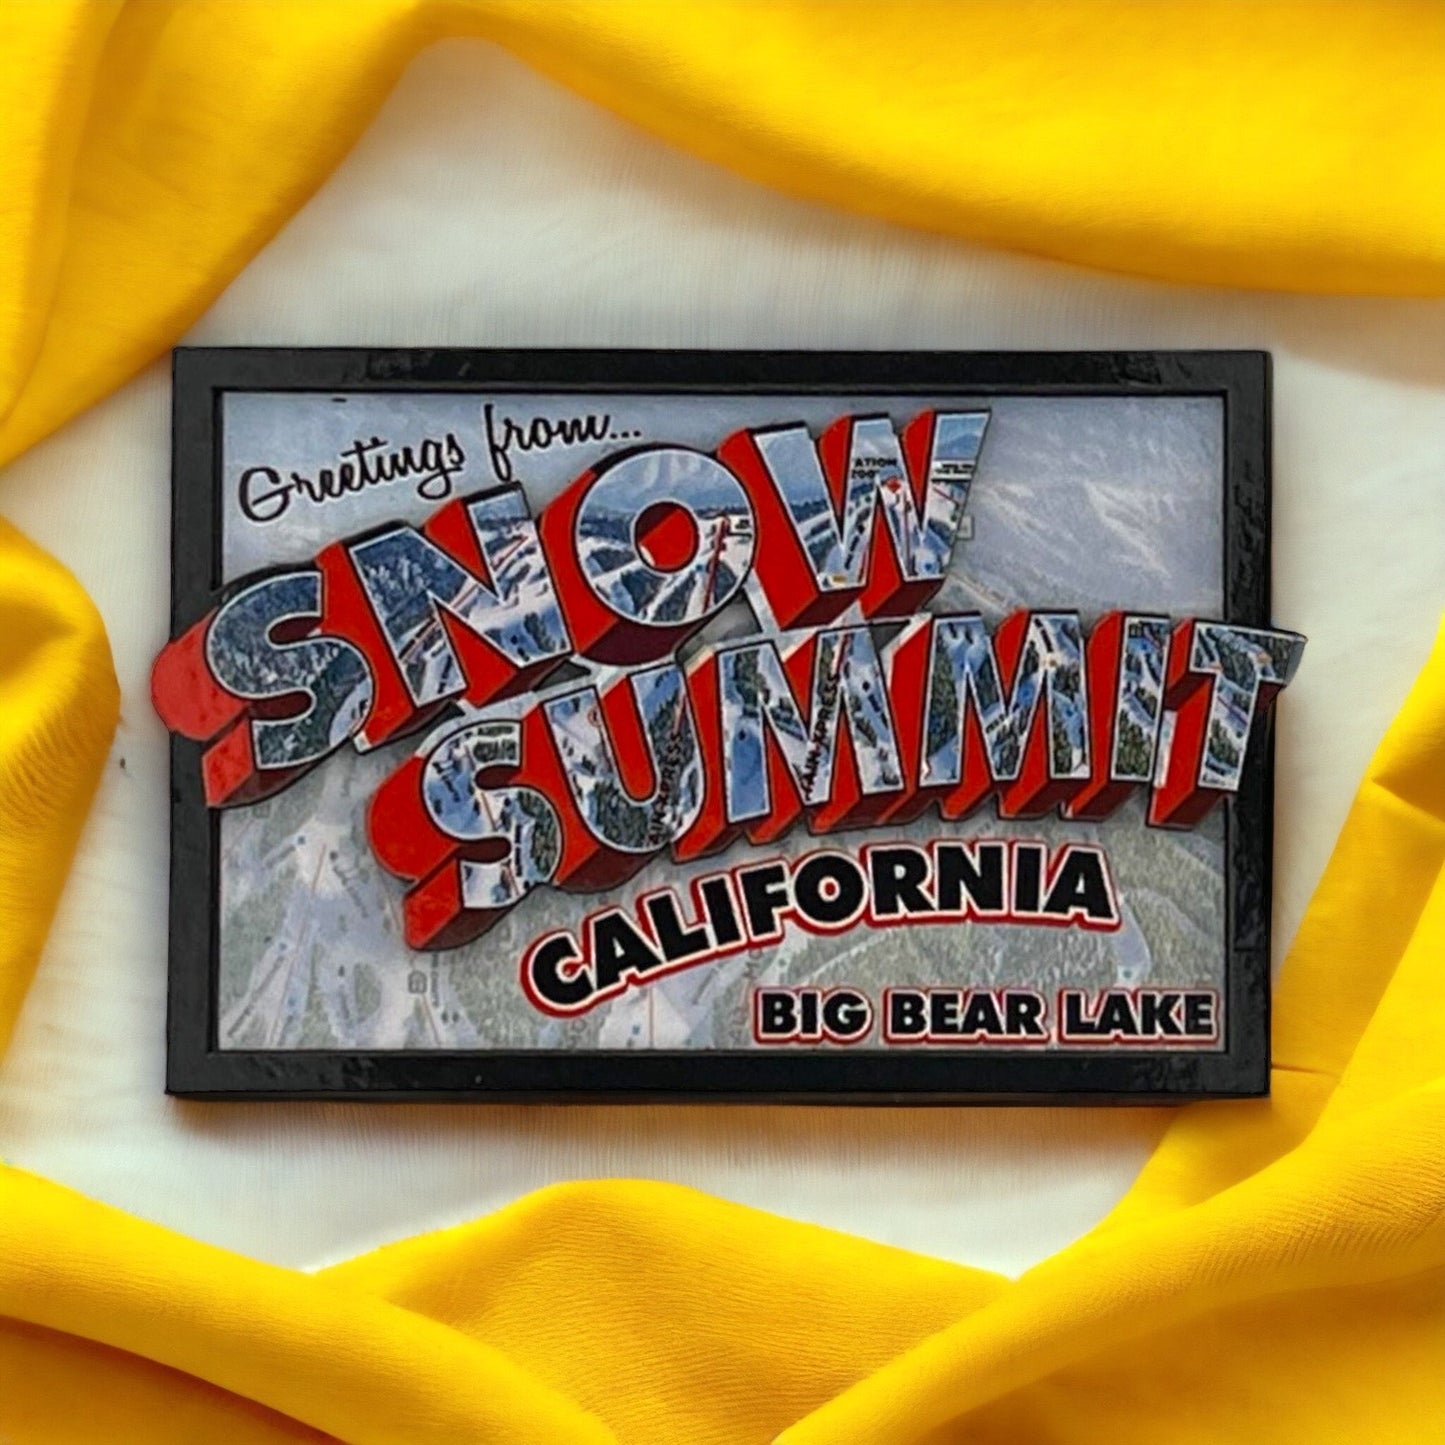 Greetings from SNow Summit california big bear lake magnet with Snow Summit logo